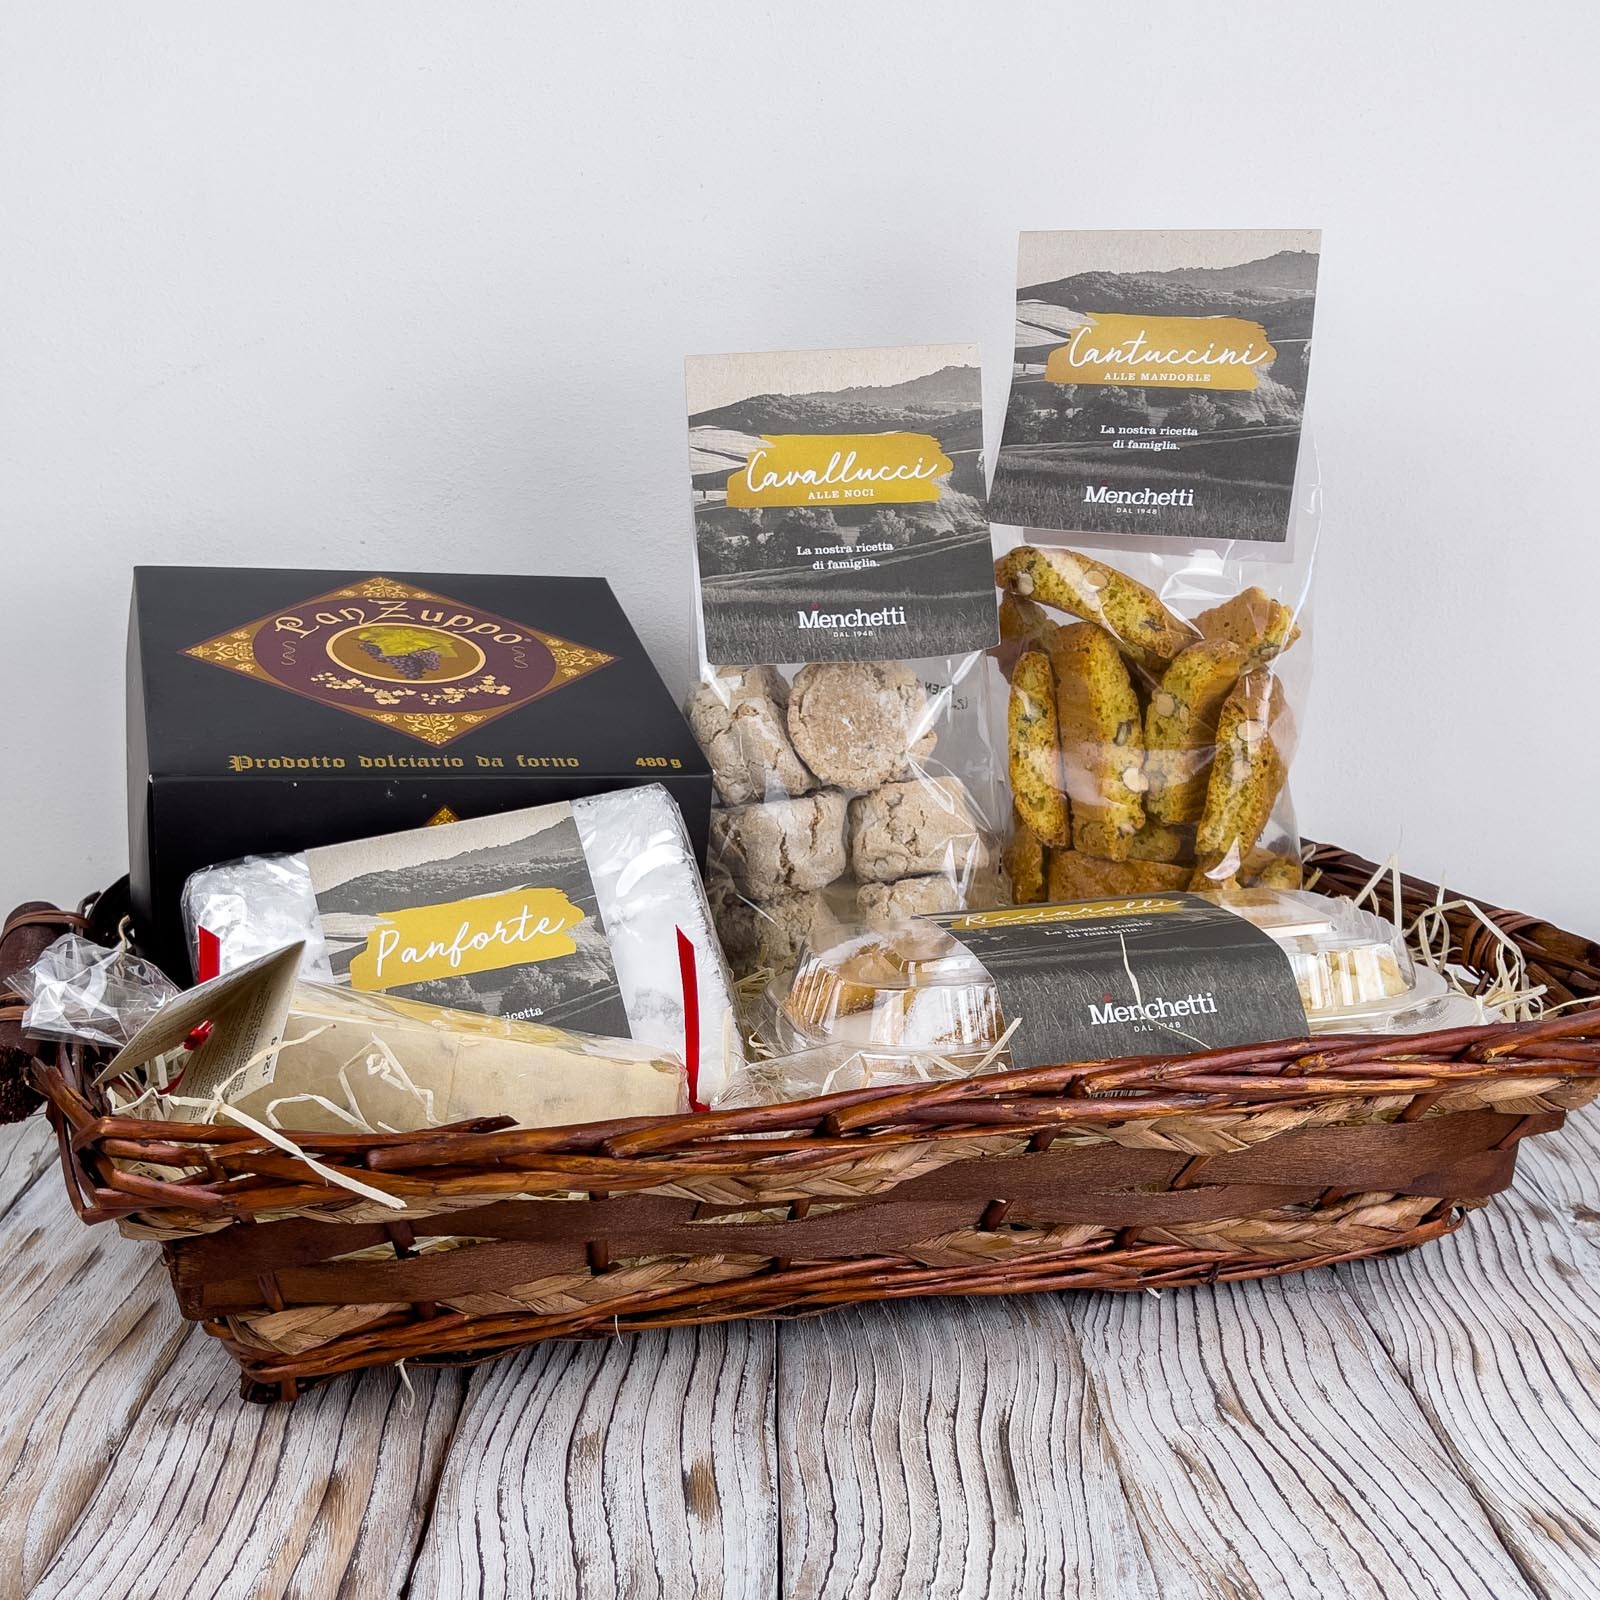 Gift Hamper consisting of a selection of 6 products for a total of about 2 kg. We will pack the basket and ship it wherever you want, there is also the possibility of adding a personalized card with a message.
For more information or product changes contact us in chat.